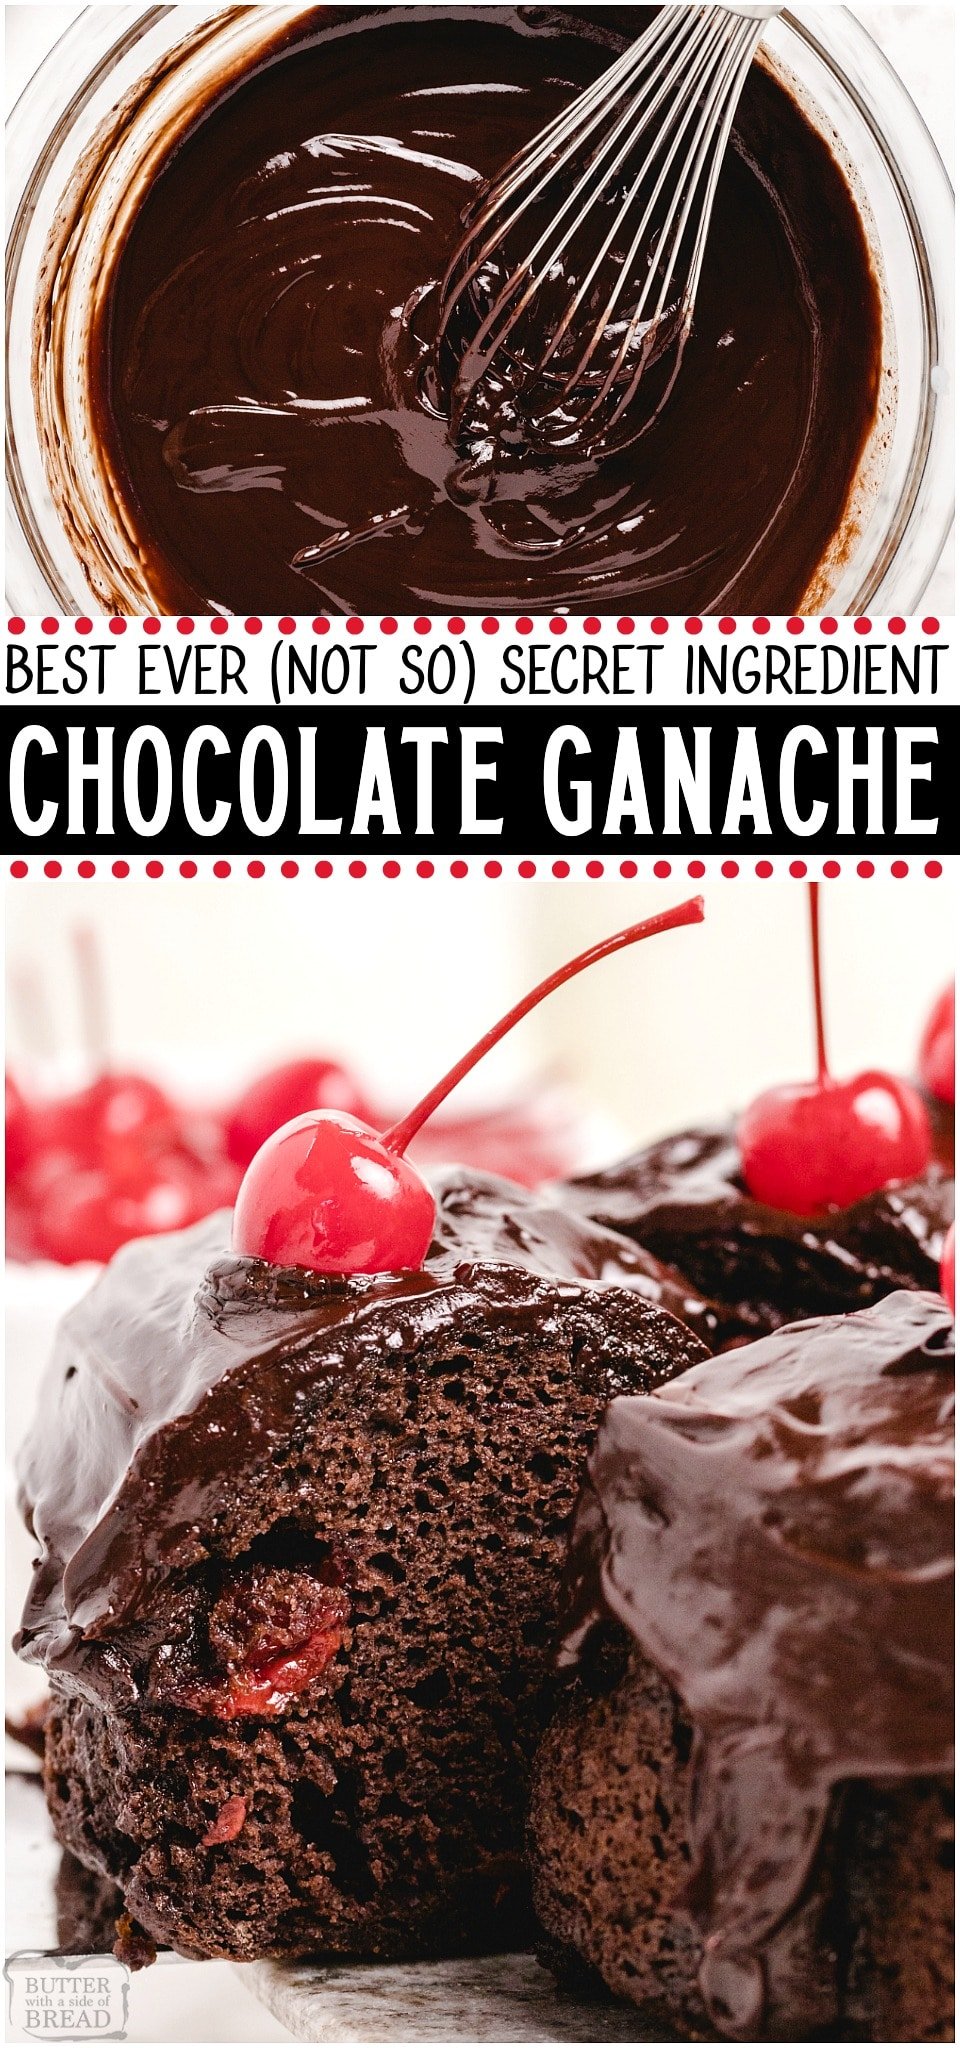 Best Chocolate Ganache Ever made with just 3 ingredients & yields the silkiest, smooth & rich ganache. You MUST TRY my recipe- the "secret" ingredient makes my chocolate ganache incredible! 